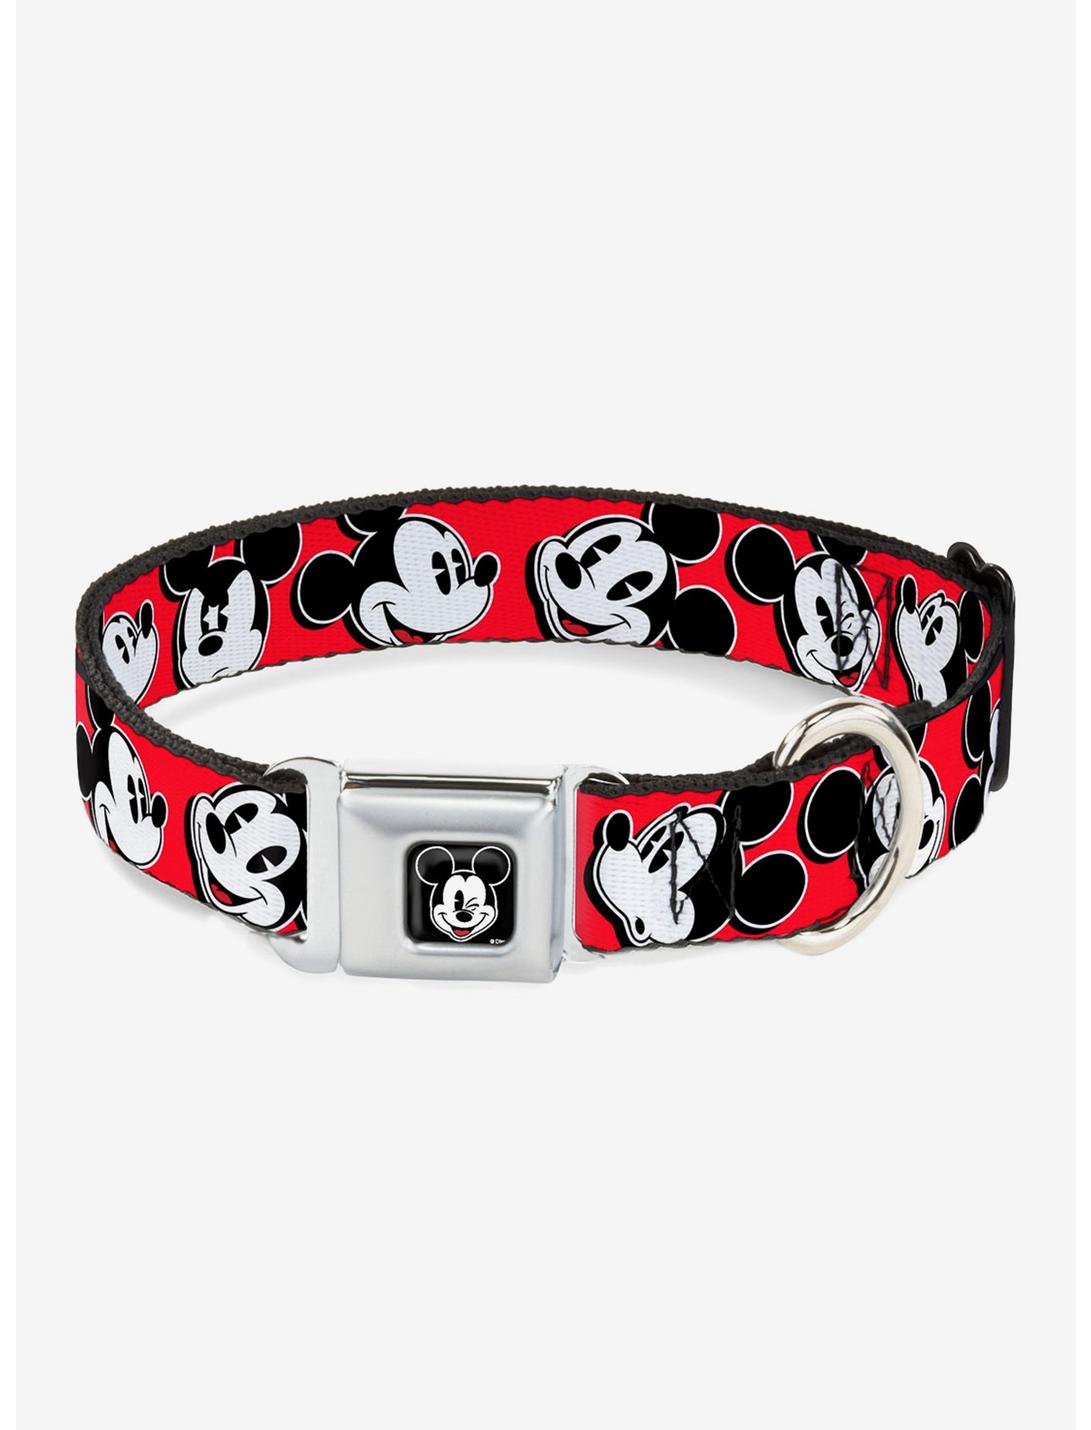 Disney Mickey Mouse Expressions Seatbelt Buckle Dog Collar, RED, hi-res